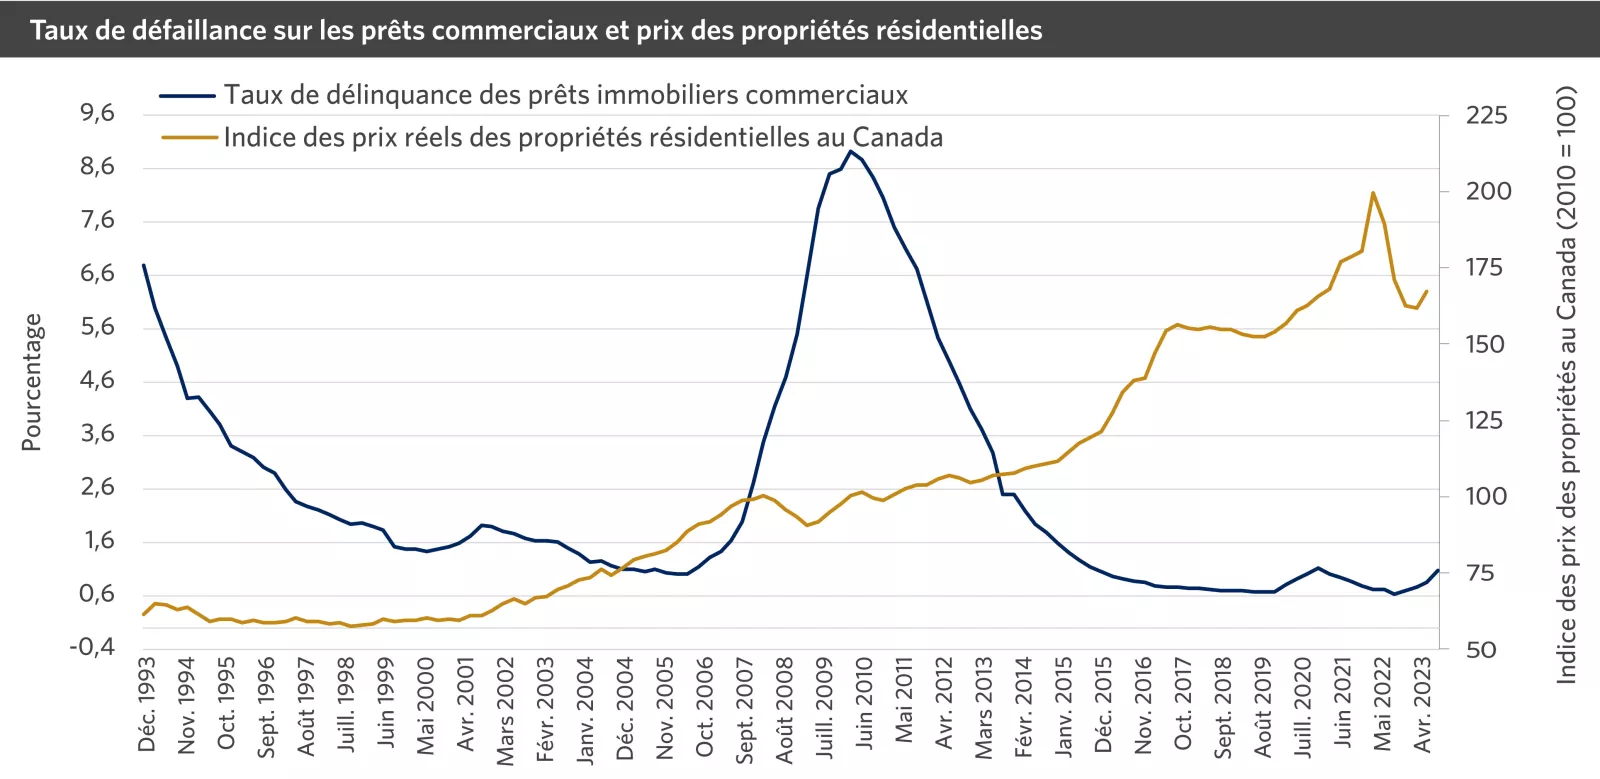 Chart showing Commercial Delinquency rates and Residential Property Prices